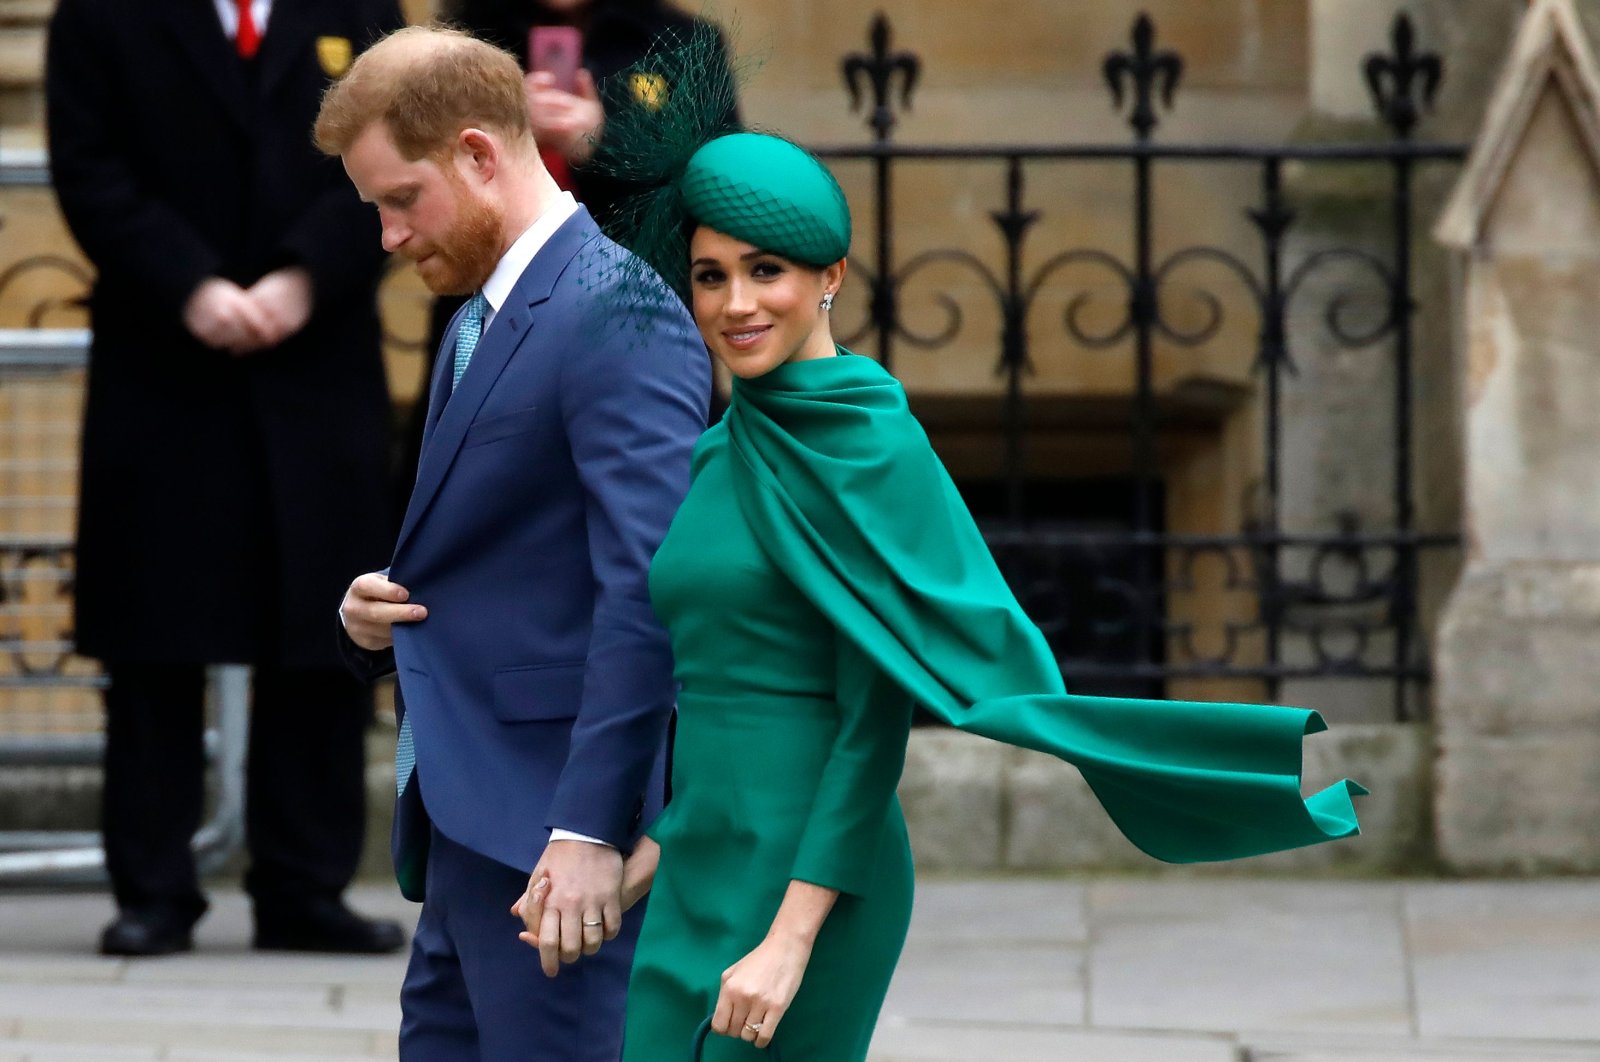  In this file photo taken on March 9, 2020 Britain's Prince Harry, Duke of Sussex, (L) and Meghan, Duchess of Sussex arrive to attend the annual Commonwealth Service at Westminster Abbey in London. (AFP Photo)